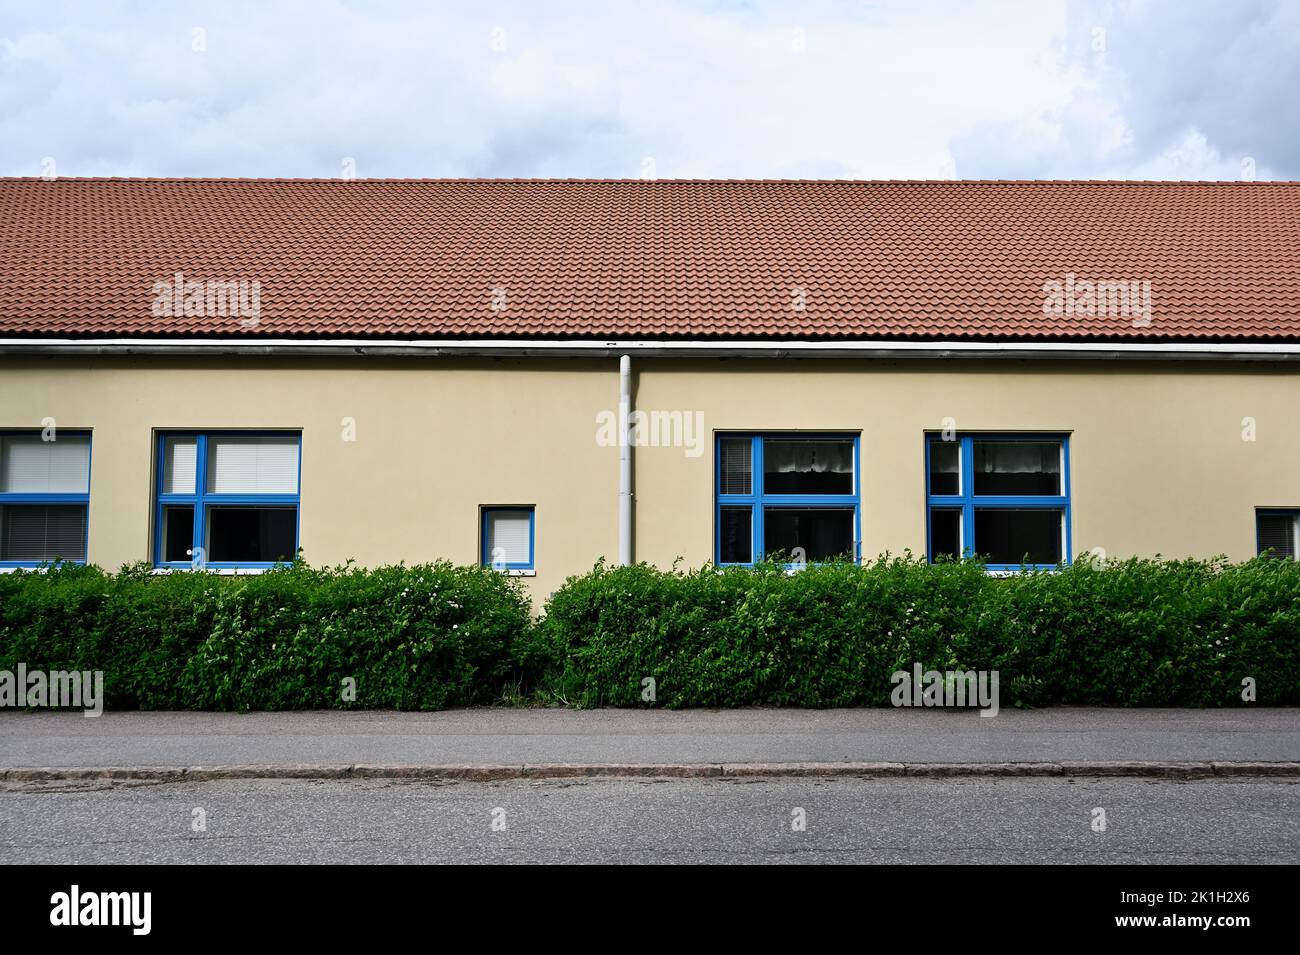 front view of a building with a tiled roof, deadpan photography Stock Photo